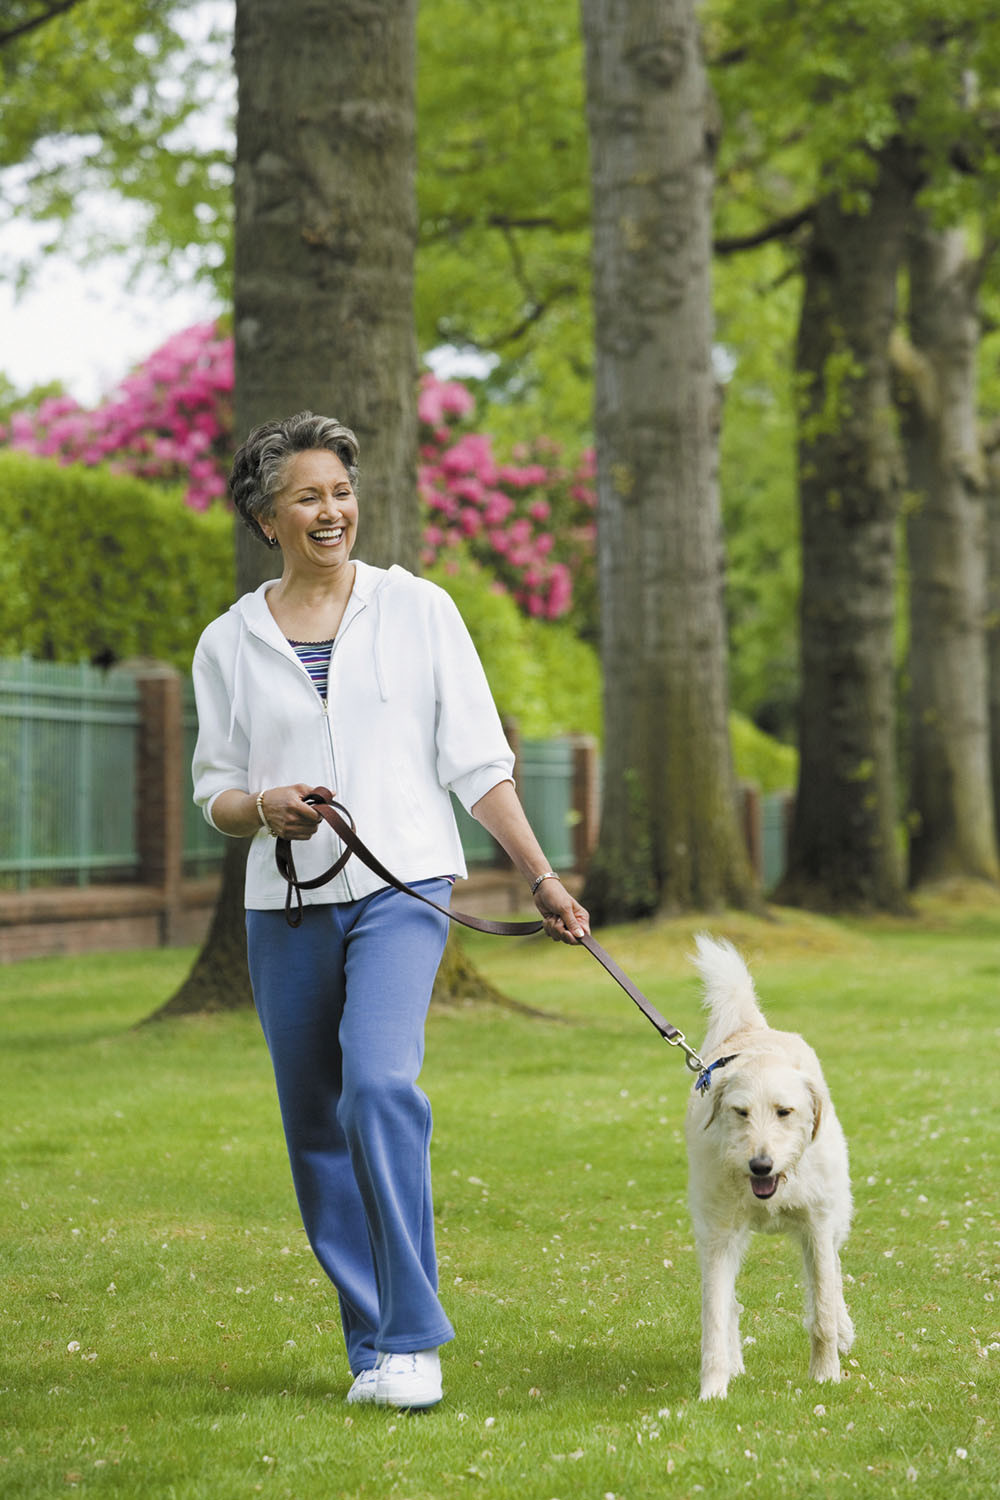 photo of a smiling woman walking a dog on a leash